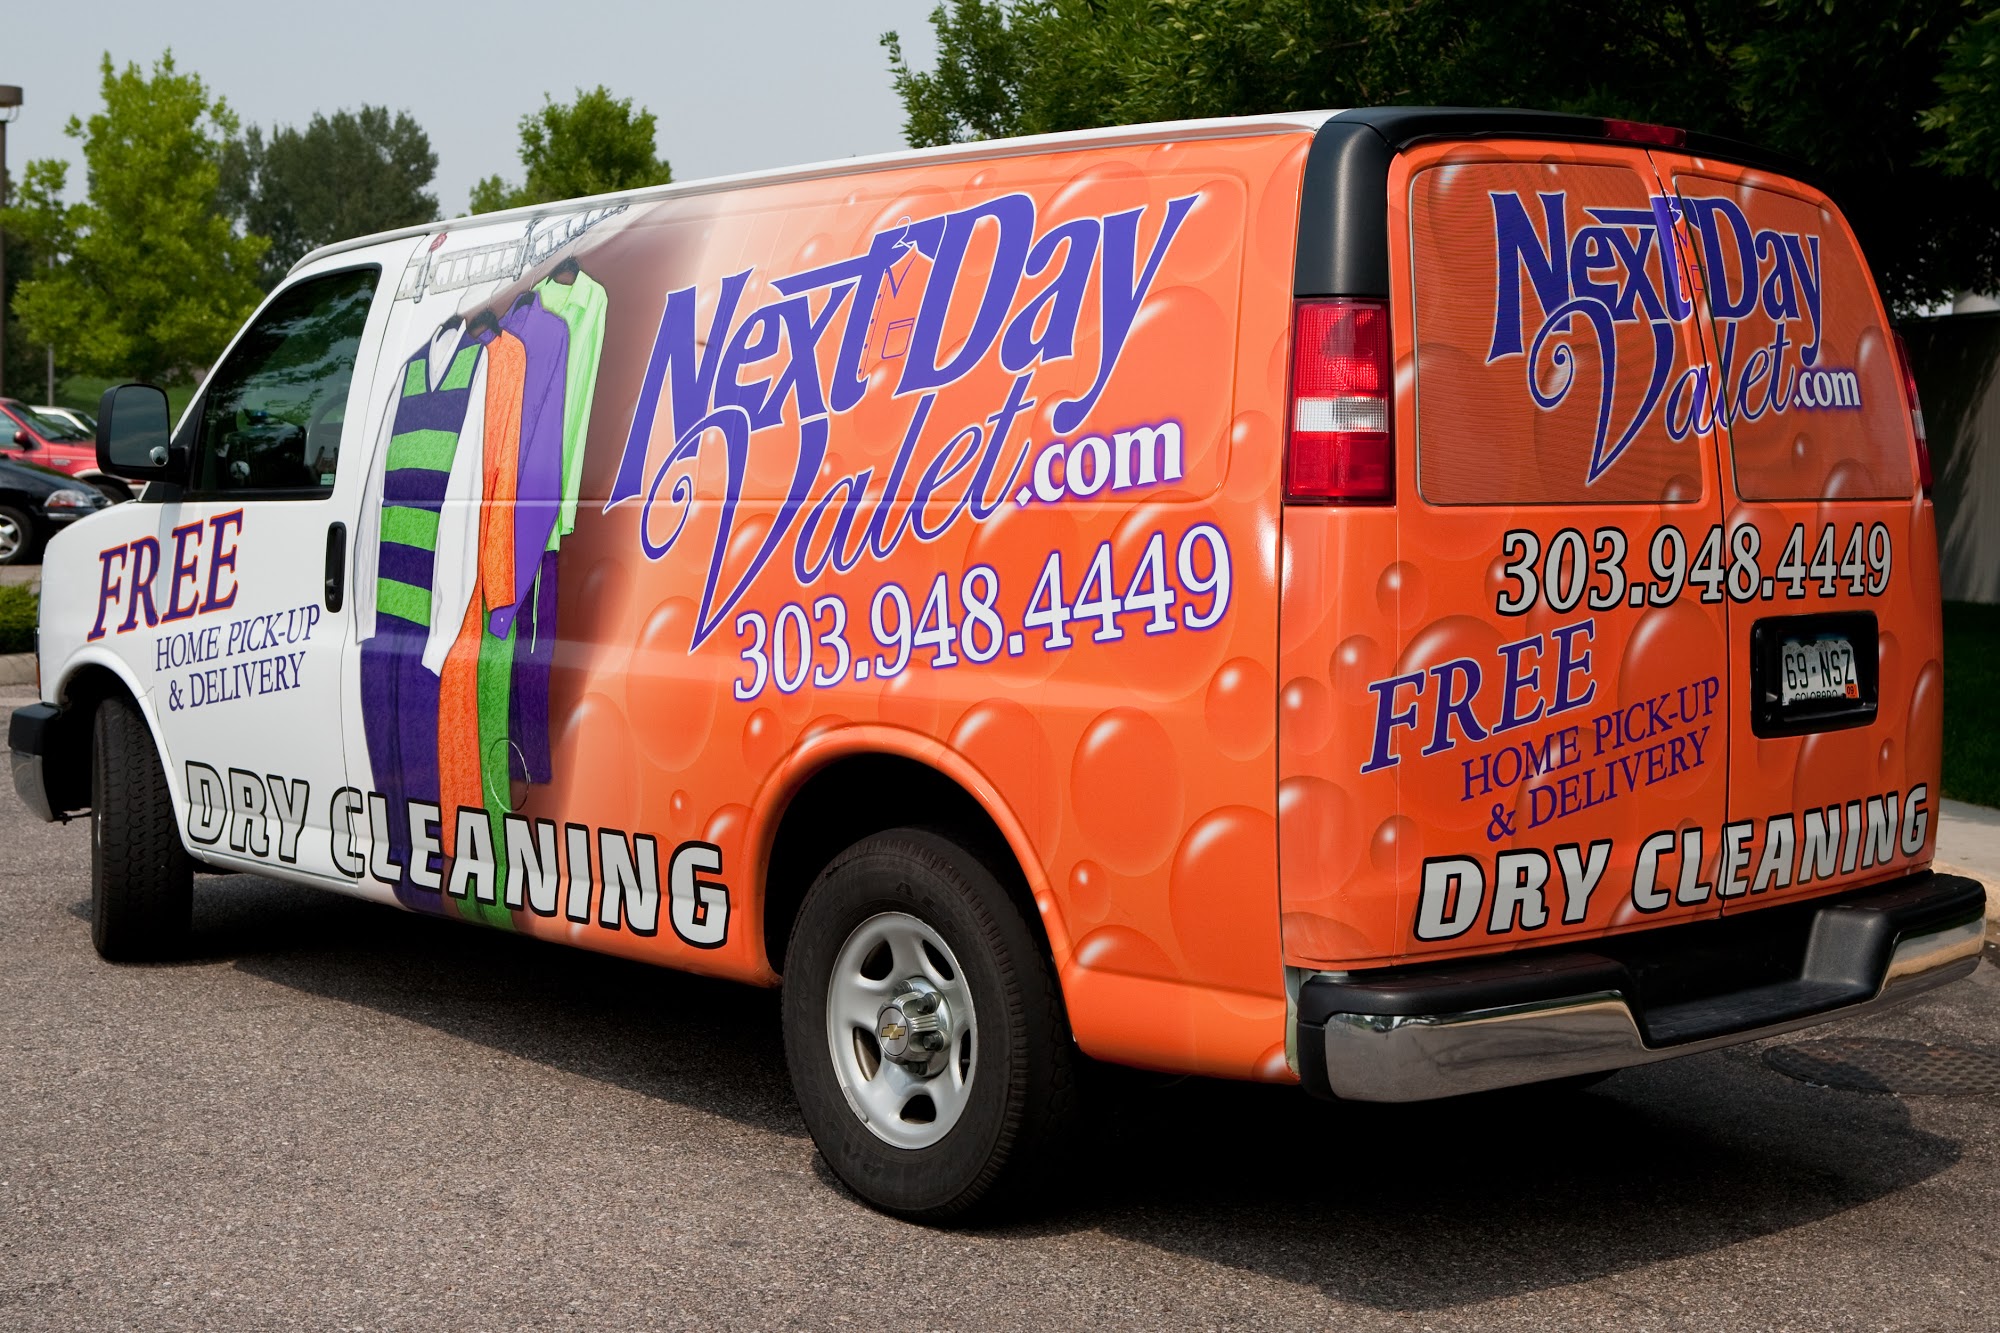 Next-Day Valet Dry Cleaning